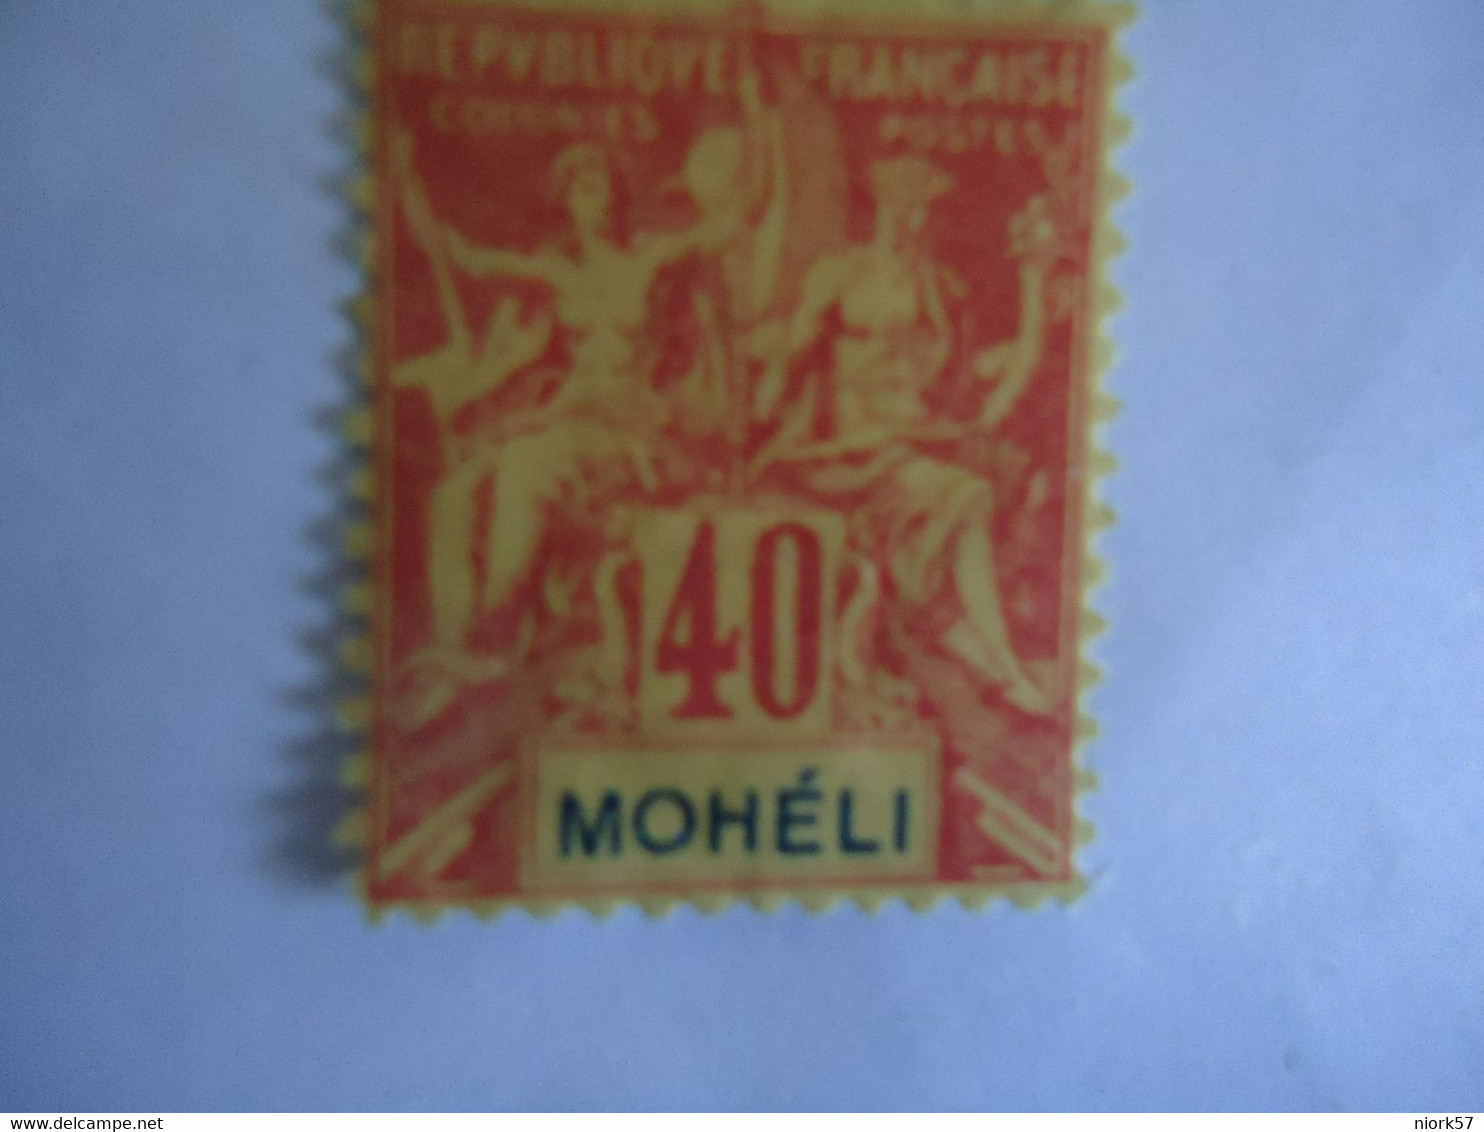 MOHELI FRANCE  COLONIES MLN  STAMPS   40C - Used Stamps